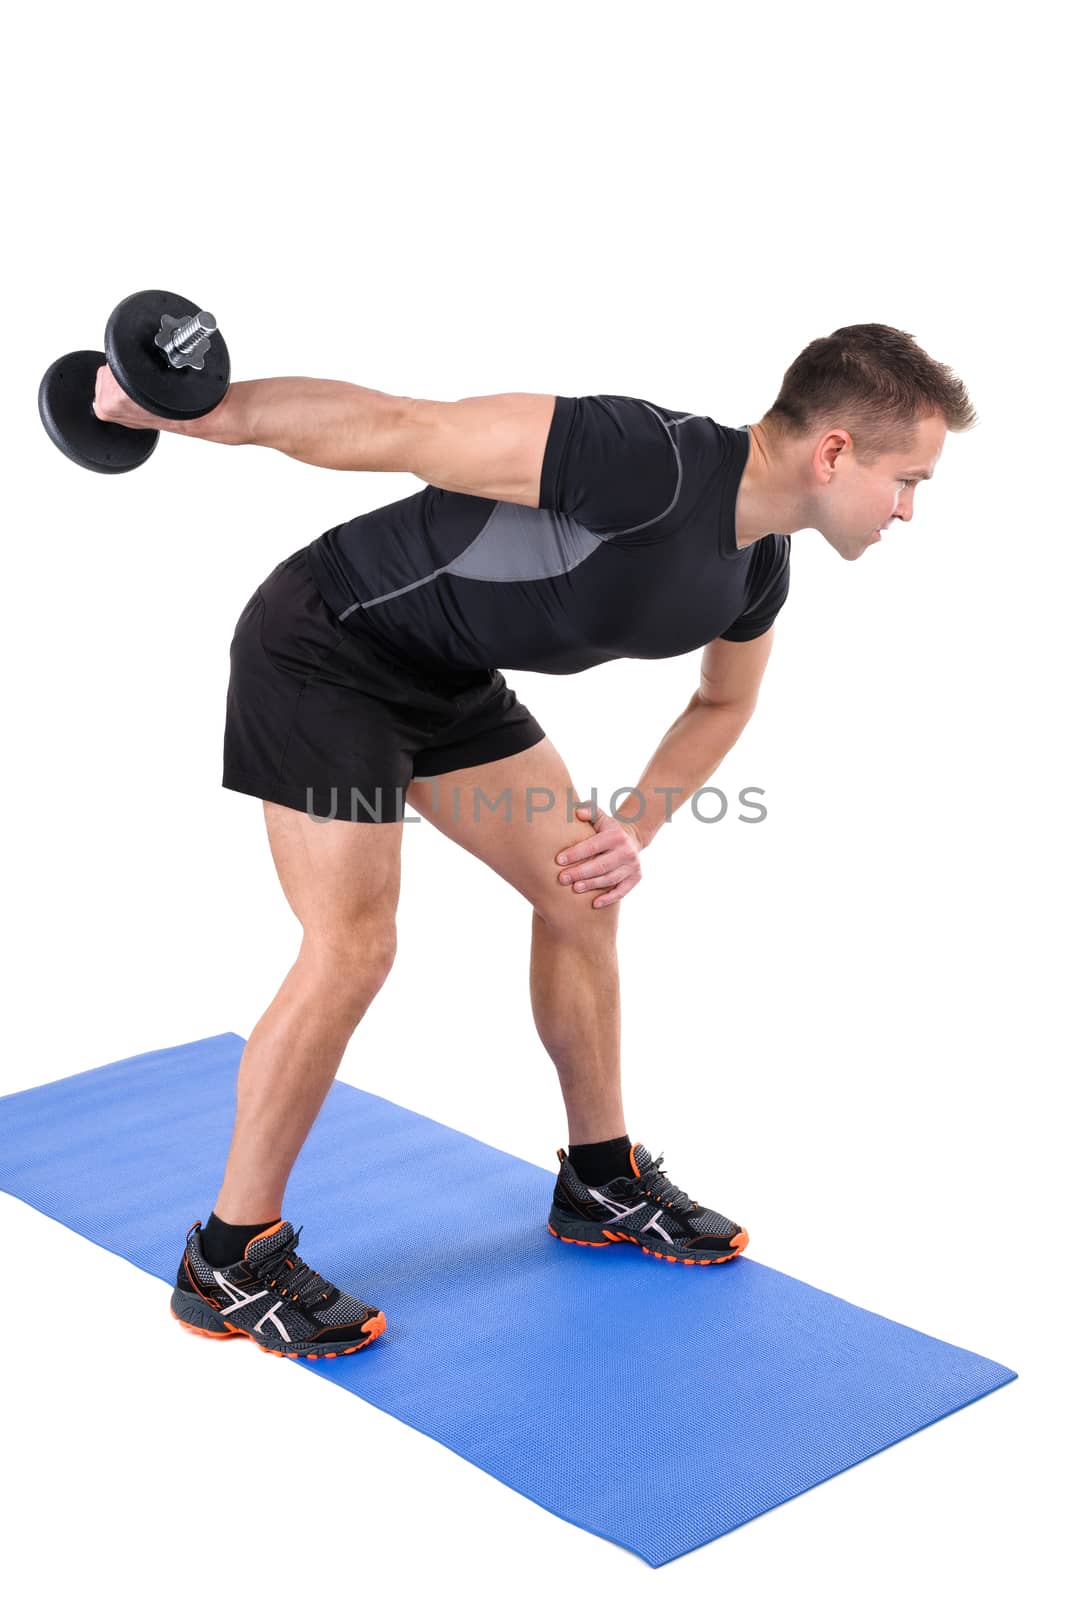 Young man shows finishing position of Standing Tricep Dumbbell Kickback workout, isolated on white